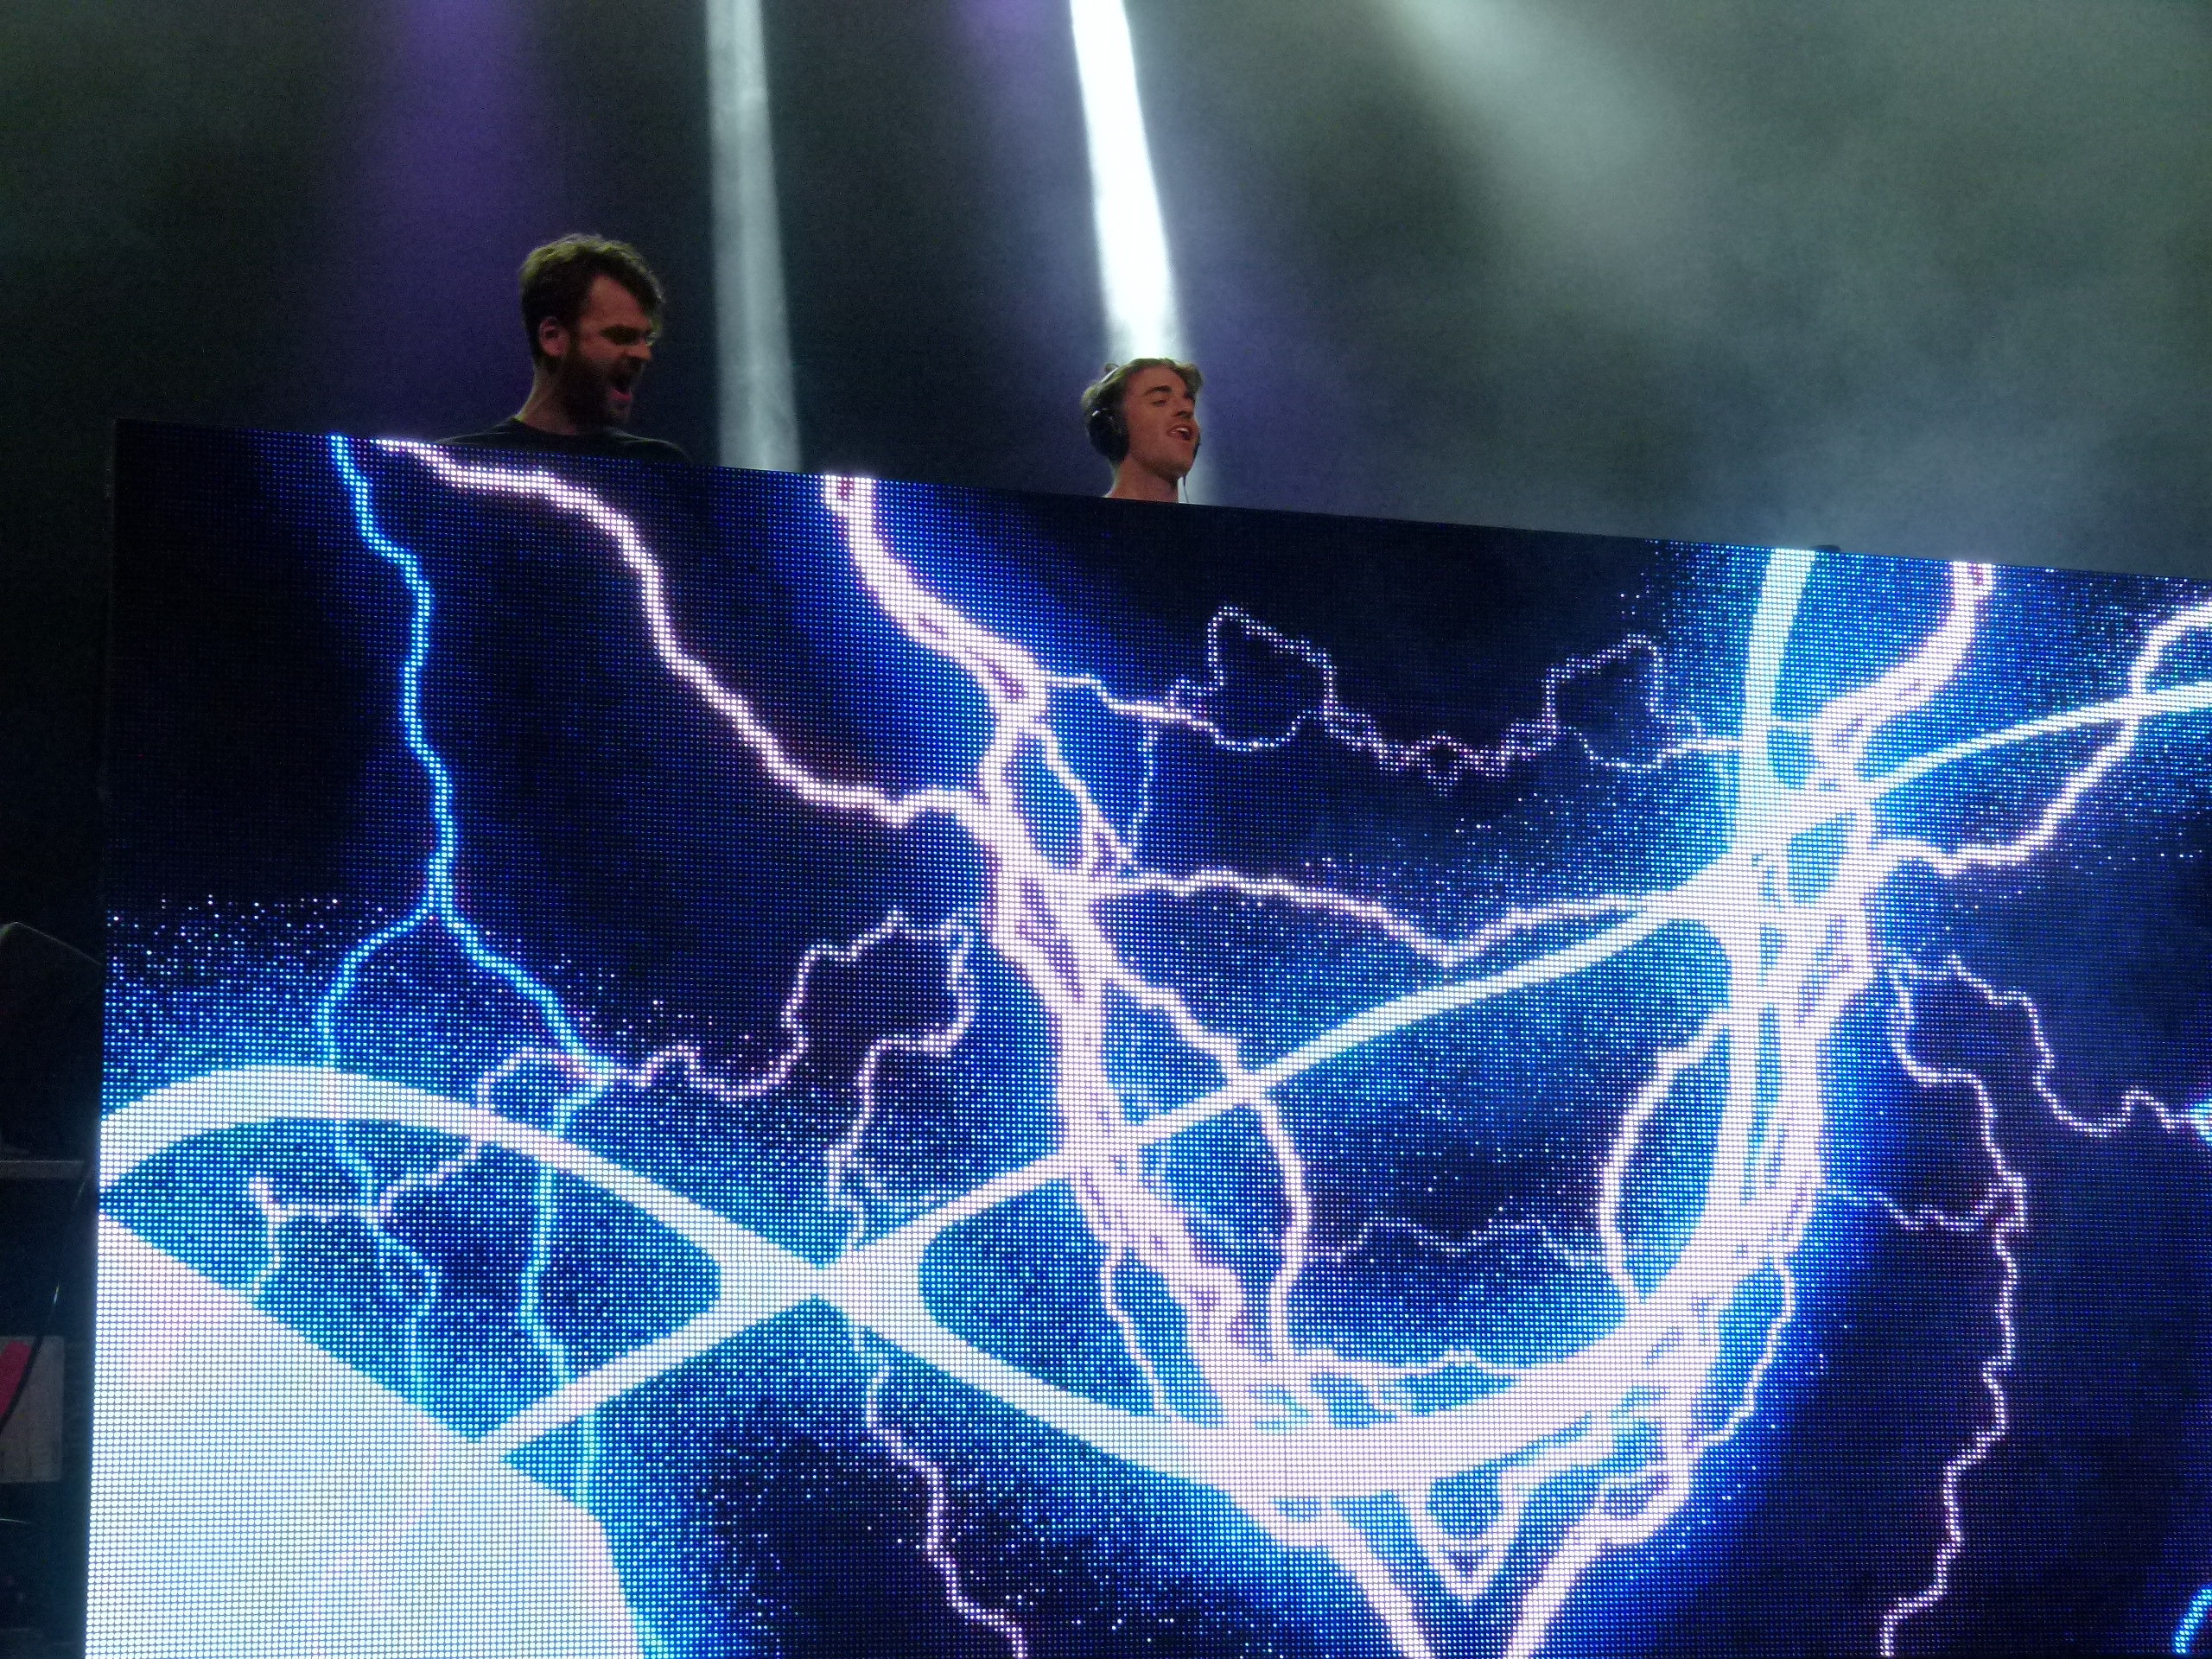 Alex Pall (l.) and Andrew Taggart (r.) of the The Chainsmokers creating electrifying music.